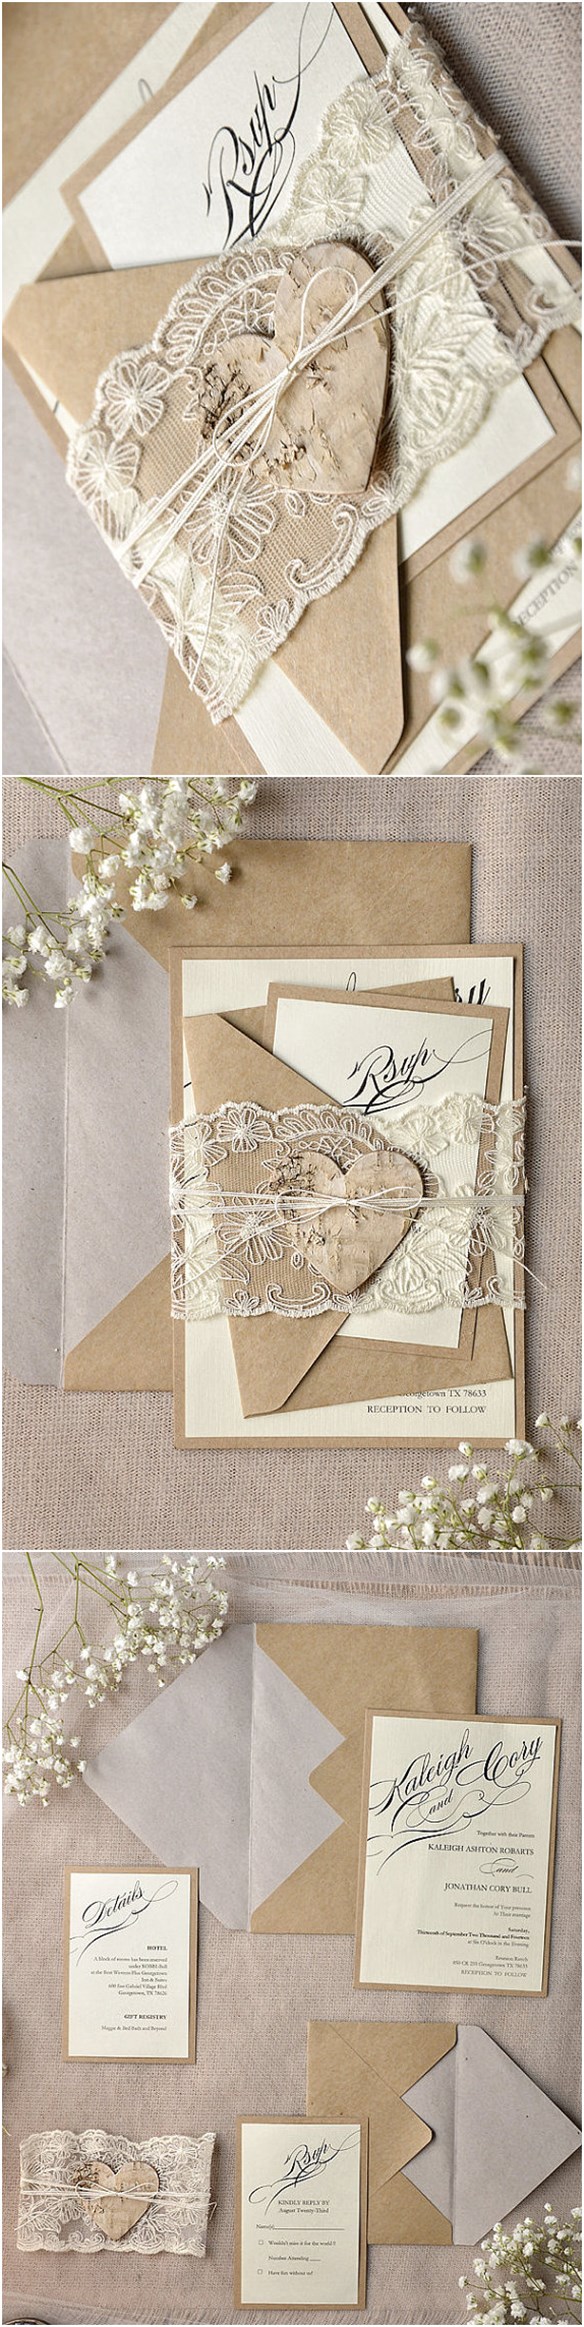 Rustic Calligraphy Recycled Lace Wedding Invitation Kits